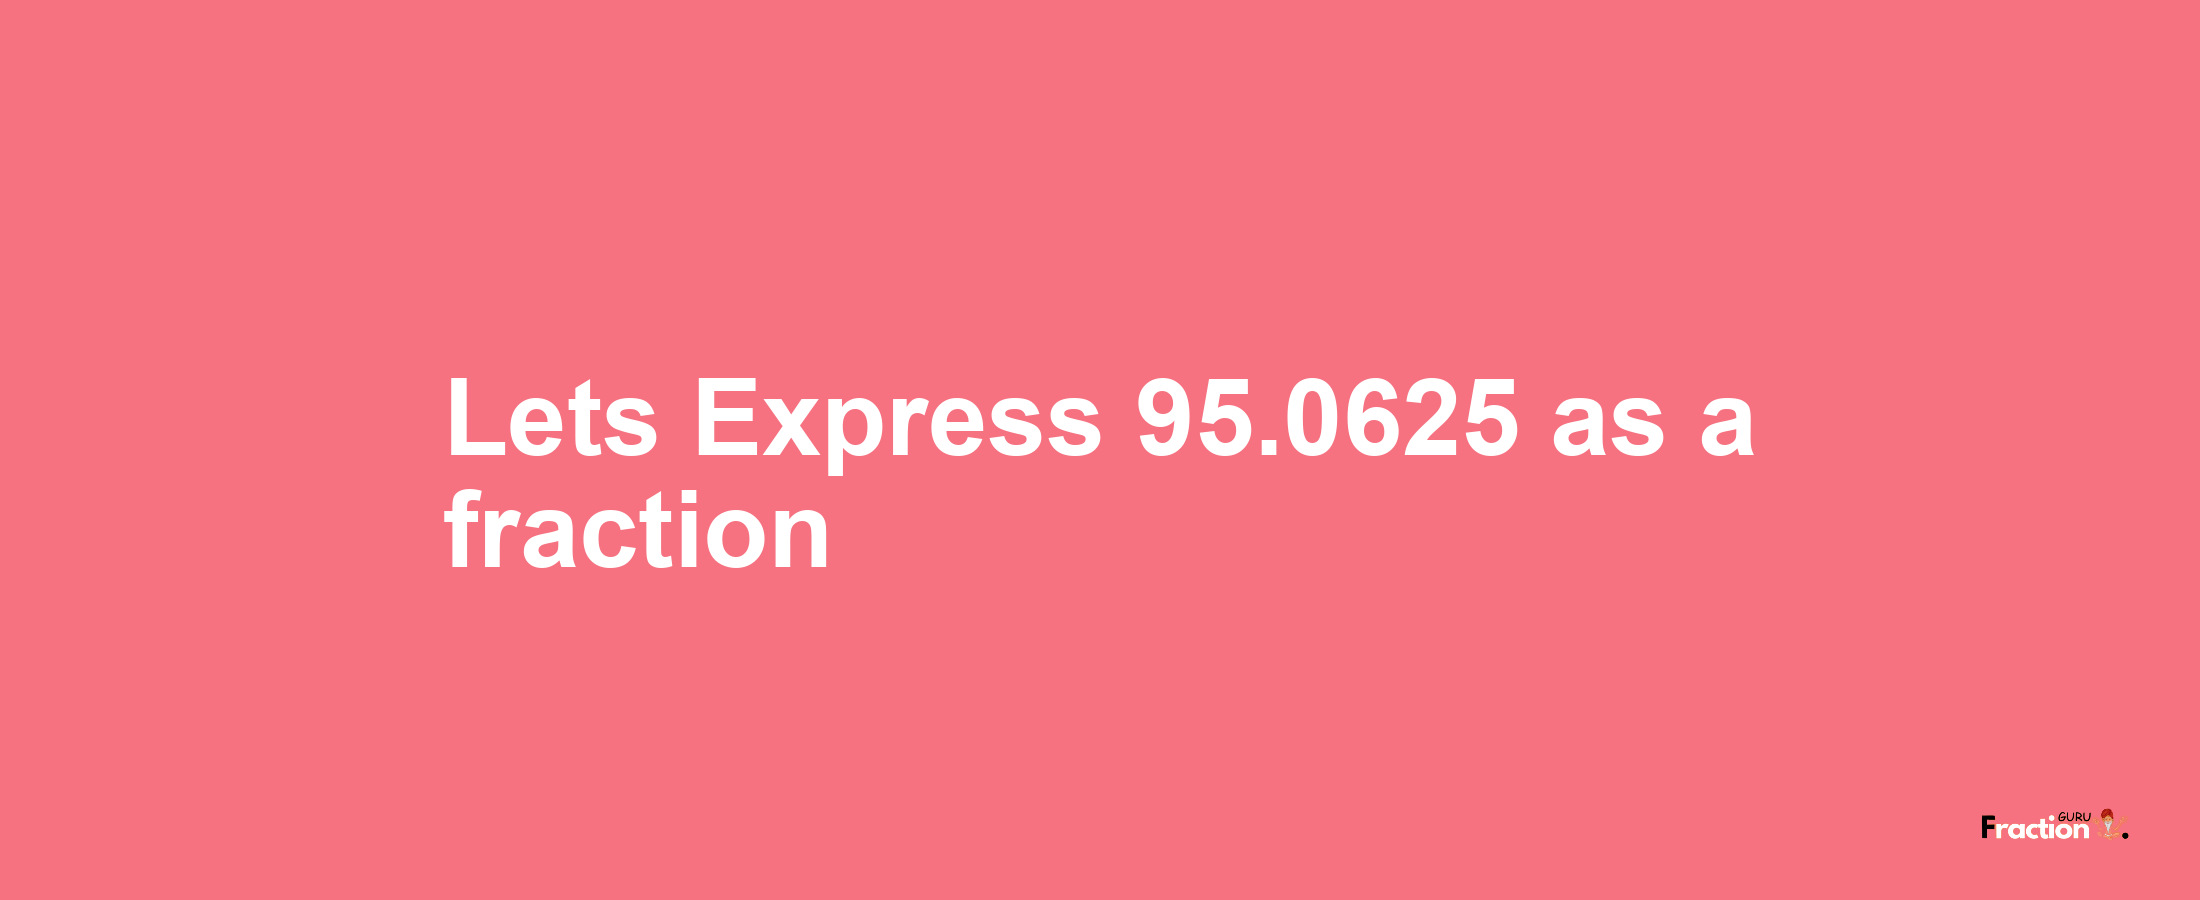 Lets Express 95.0625 as afraction